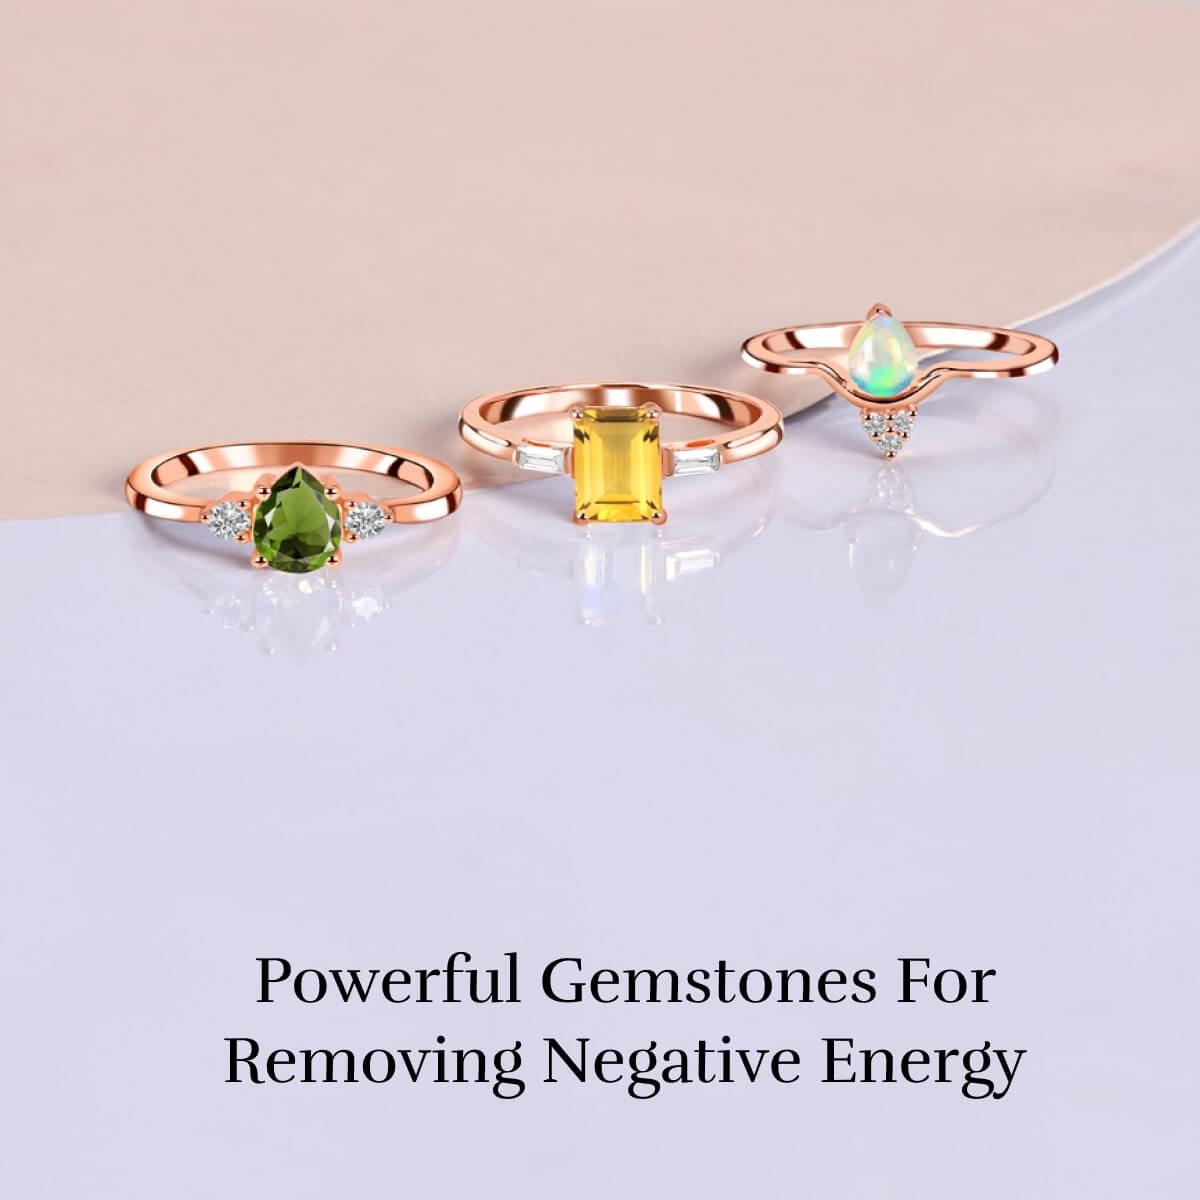 Does the gemstone remove negative energy?